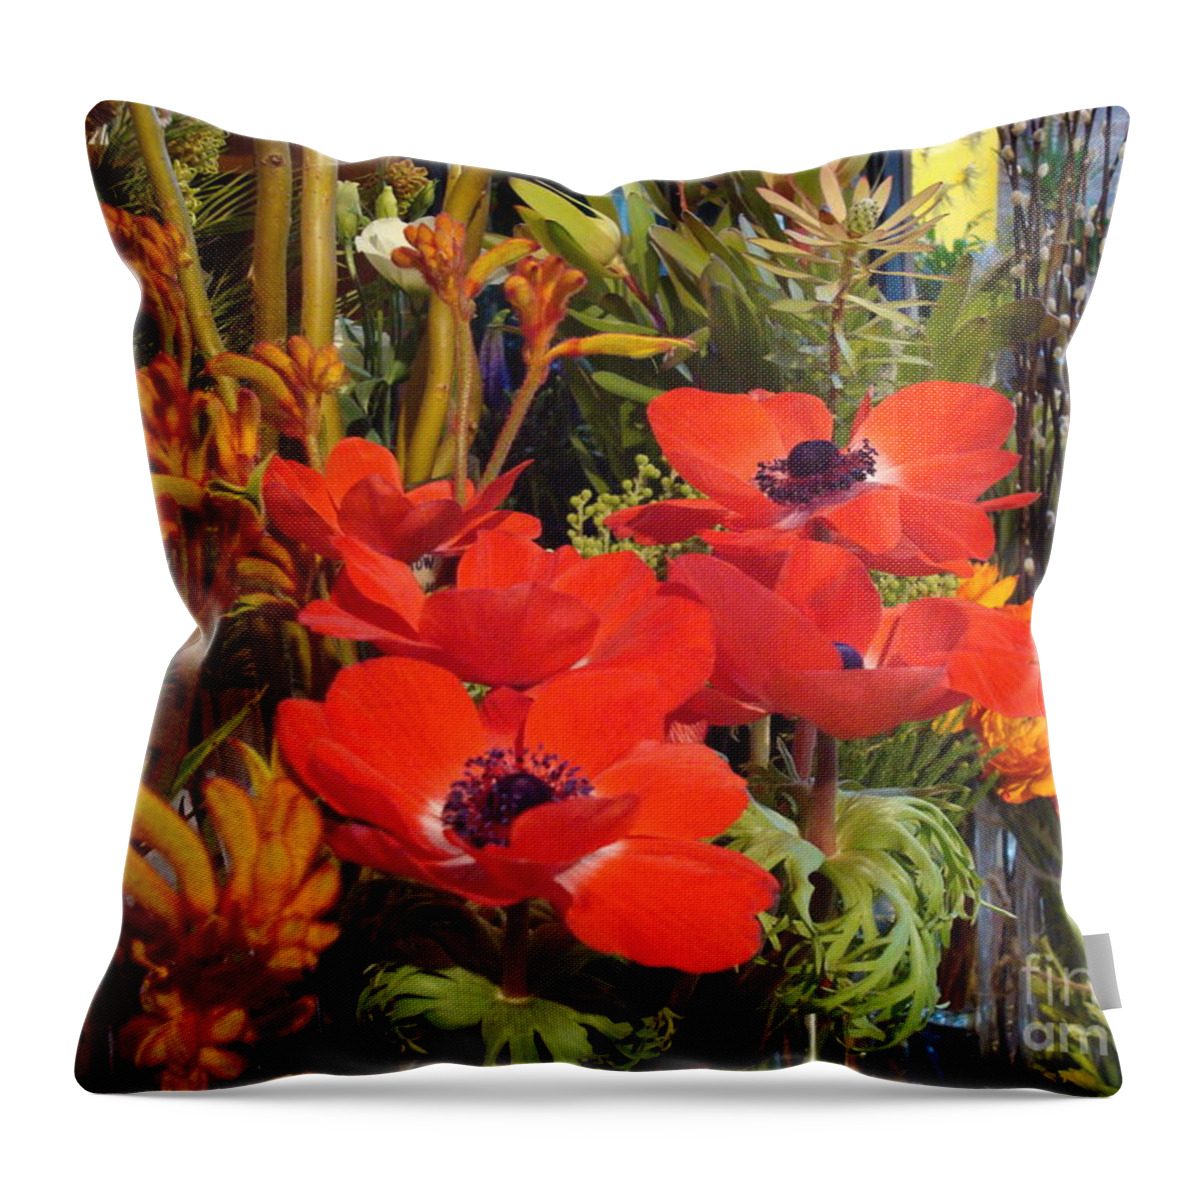 Cathy Dee Janes Throw Pillow featuring the photograph Poppiest by Cathy Dee Janes